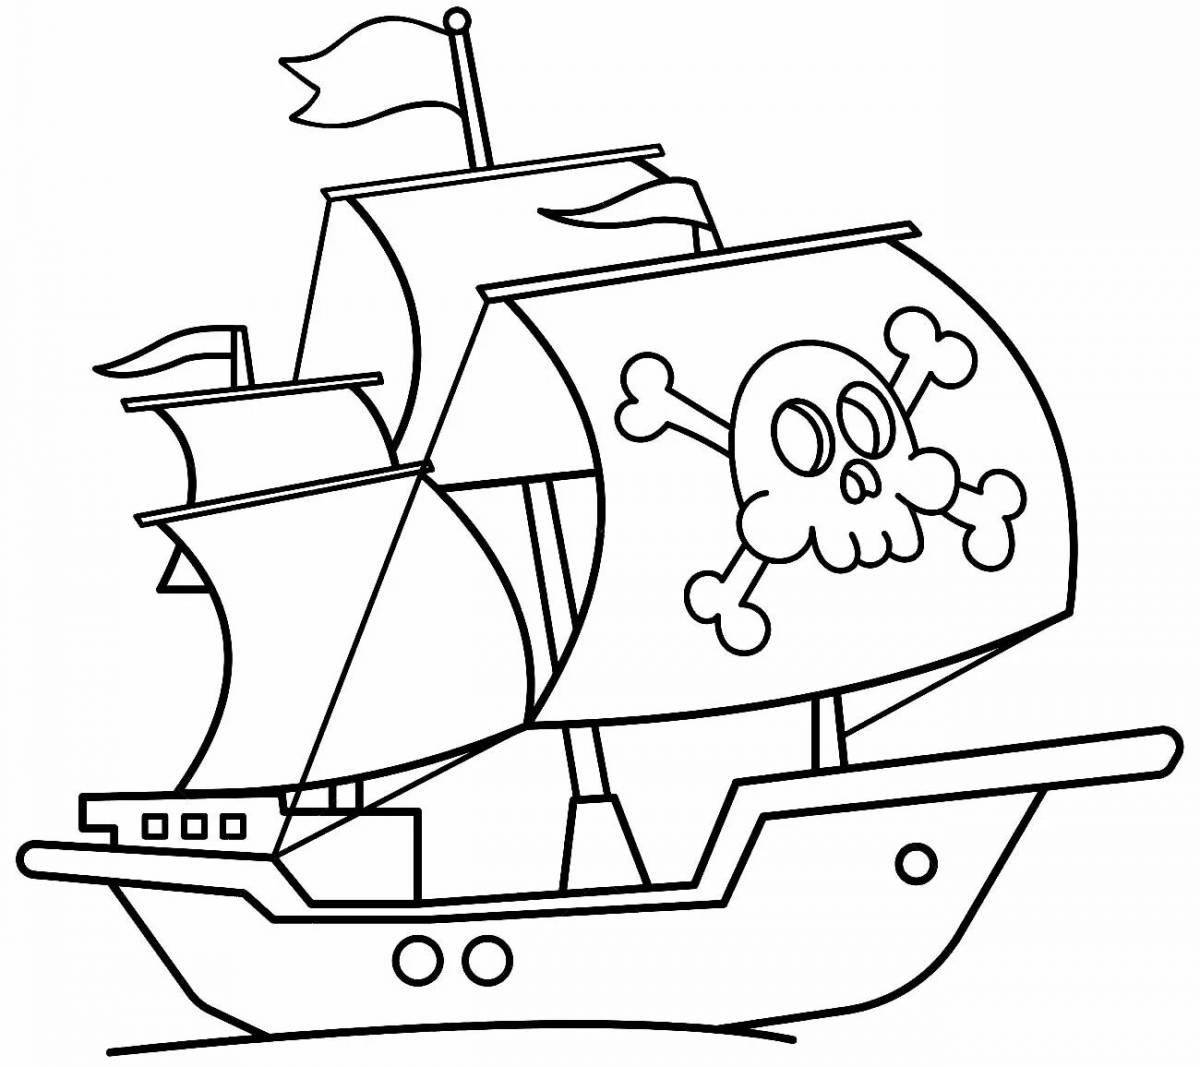 Colorful pirate ship coloring page for kids